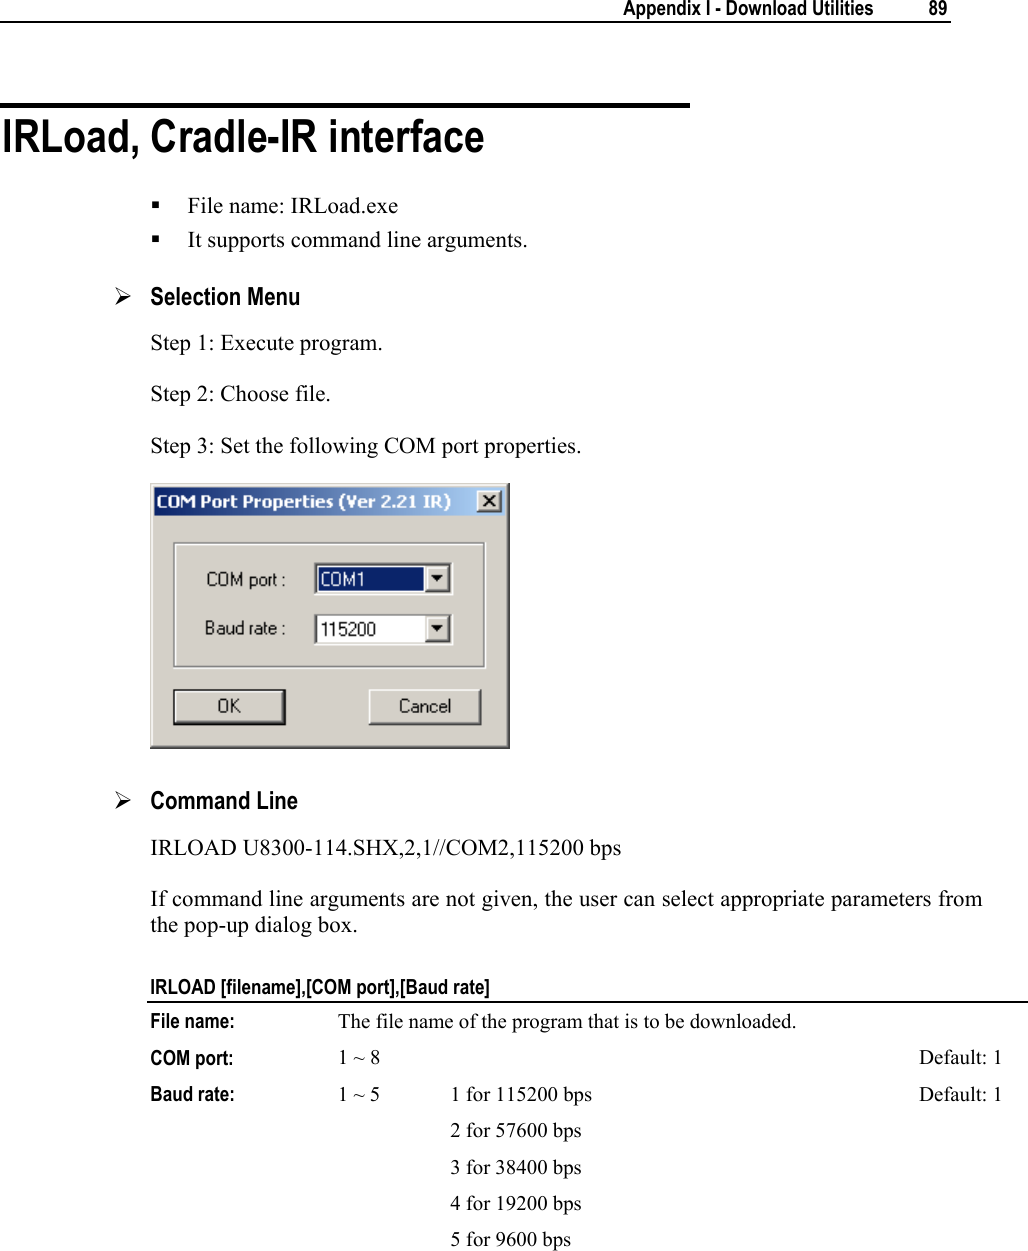        Appendix I - Download Utilities  89  IRLoad, Cradle-IR interface  File name: IRLoad.exe  It supports command line arguments. ¾ Selection Menu Step 1: Execute program. Step 2: Choose file. Step 3: Set the following COM port properties.  ¾ Command Line IRLOAD U8300-114.SHX,2,1//COM2,115200 bps If command line arguments are not given, the user can select appropriate parameters from the pop-up dialog box. IRLOAD [filename],[COM port],[Baud rate] File name:  The file name of the program that is to be downloaded. COM port:  1 ~ 8  Default: 1 Baud rate:  1 ~ 5   1 for 115200 bps 2 for 57600 bps 3 for 38400 bps 4 for 19200 bps 5 for 9600 bps Default: 1   